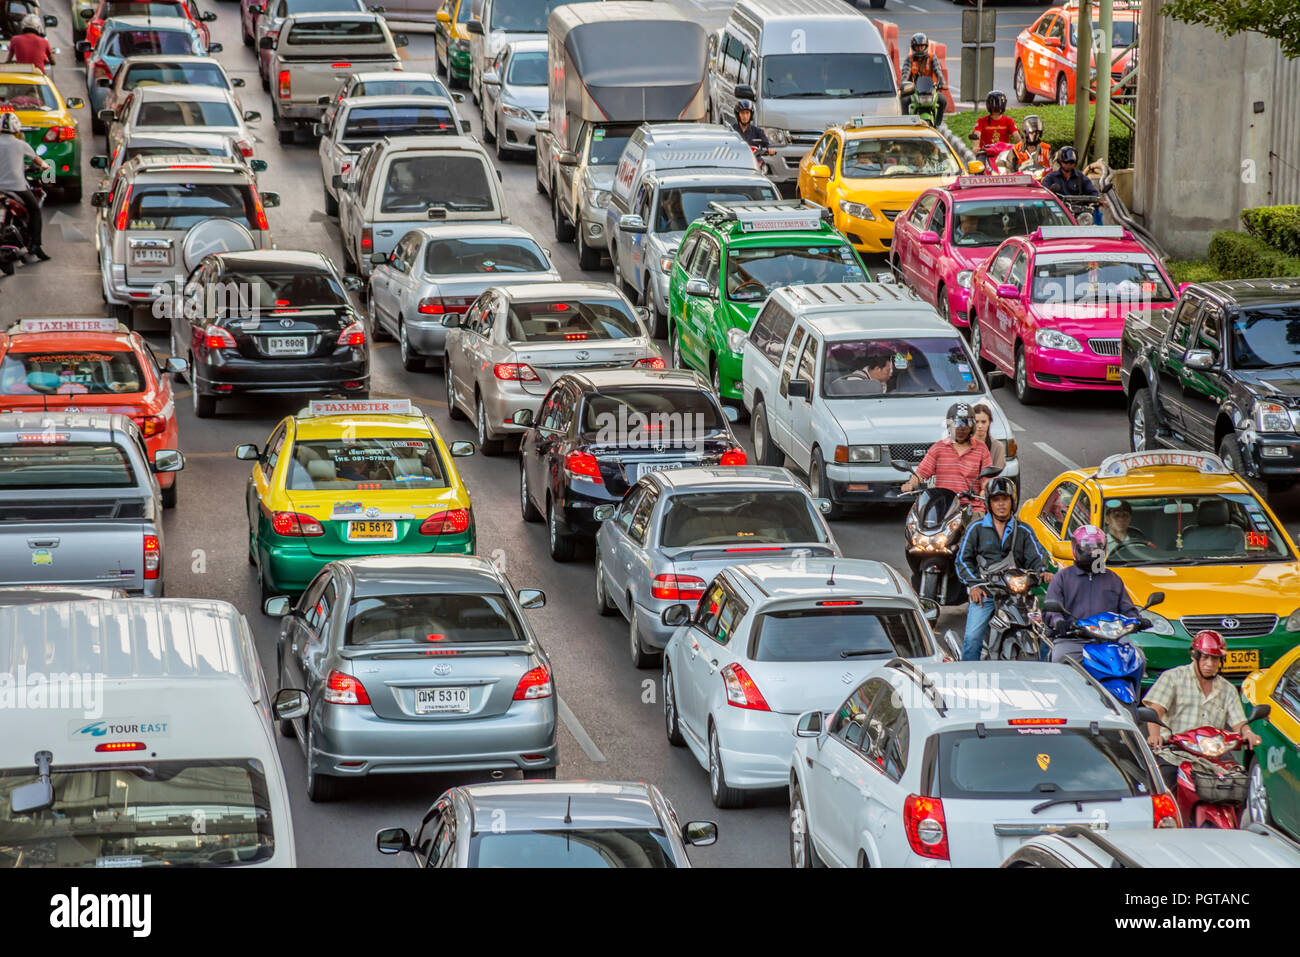 Streetscape with traffic jam in the city centre of Bangkok, Thailand Stock Photo